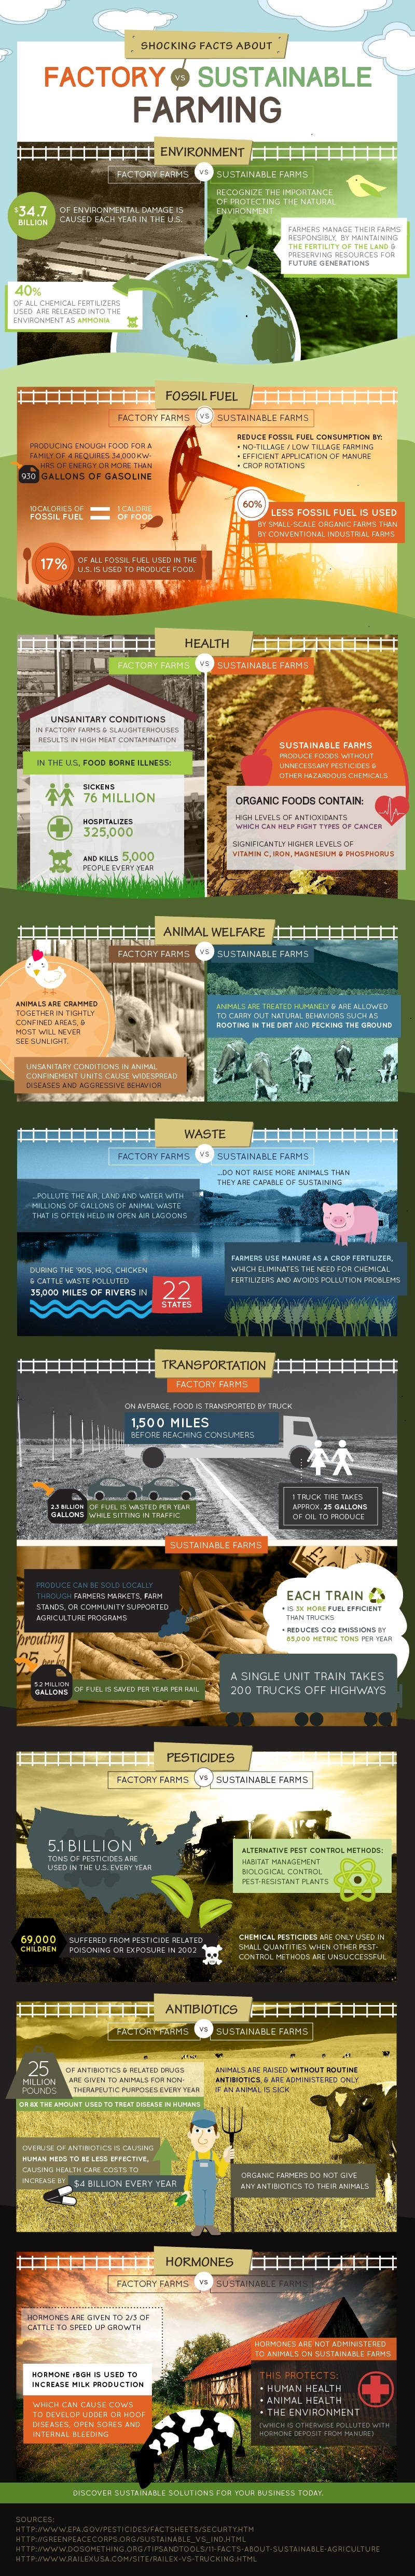 Shocking Facts About Factory Farming VS Sustainable Farming